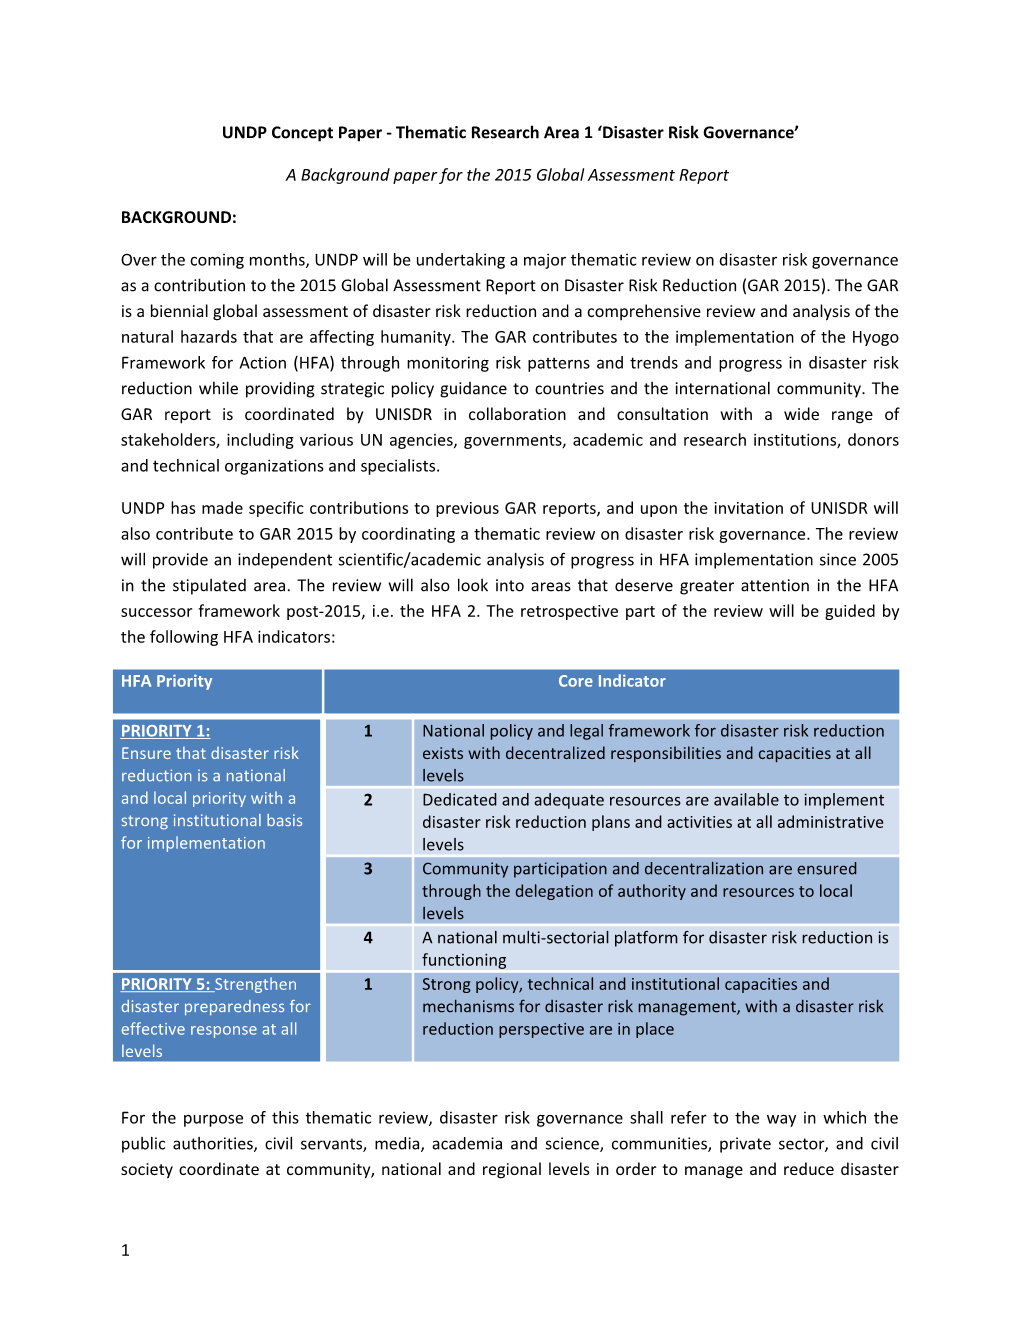 UNDP Concept Paper - Thematic Research Area 1 Disaster Risk Governance